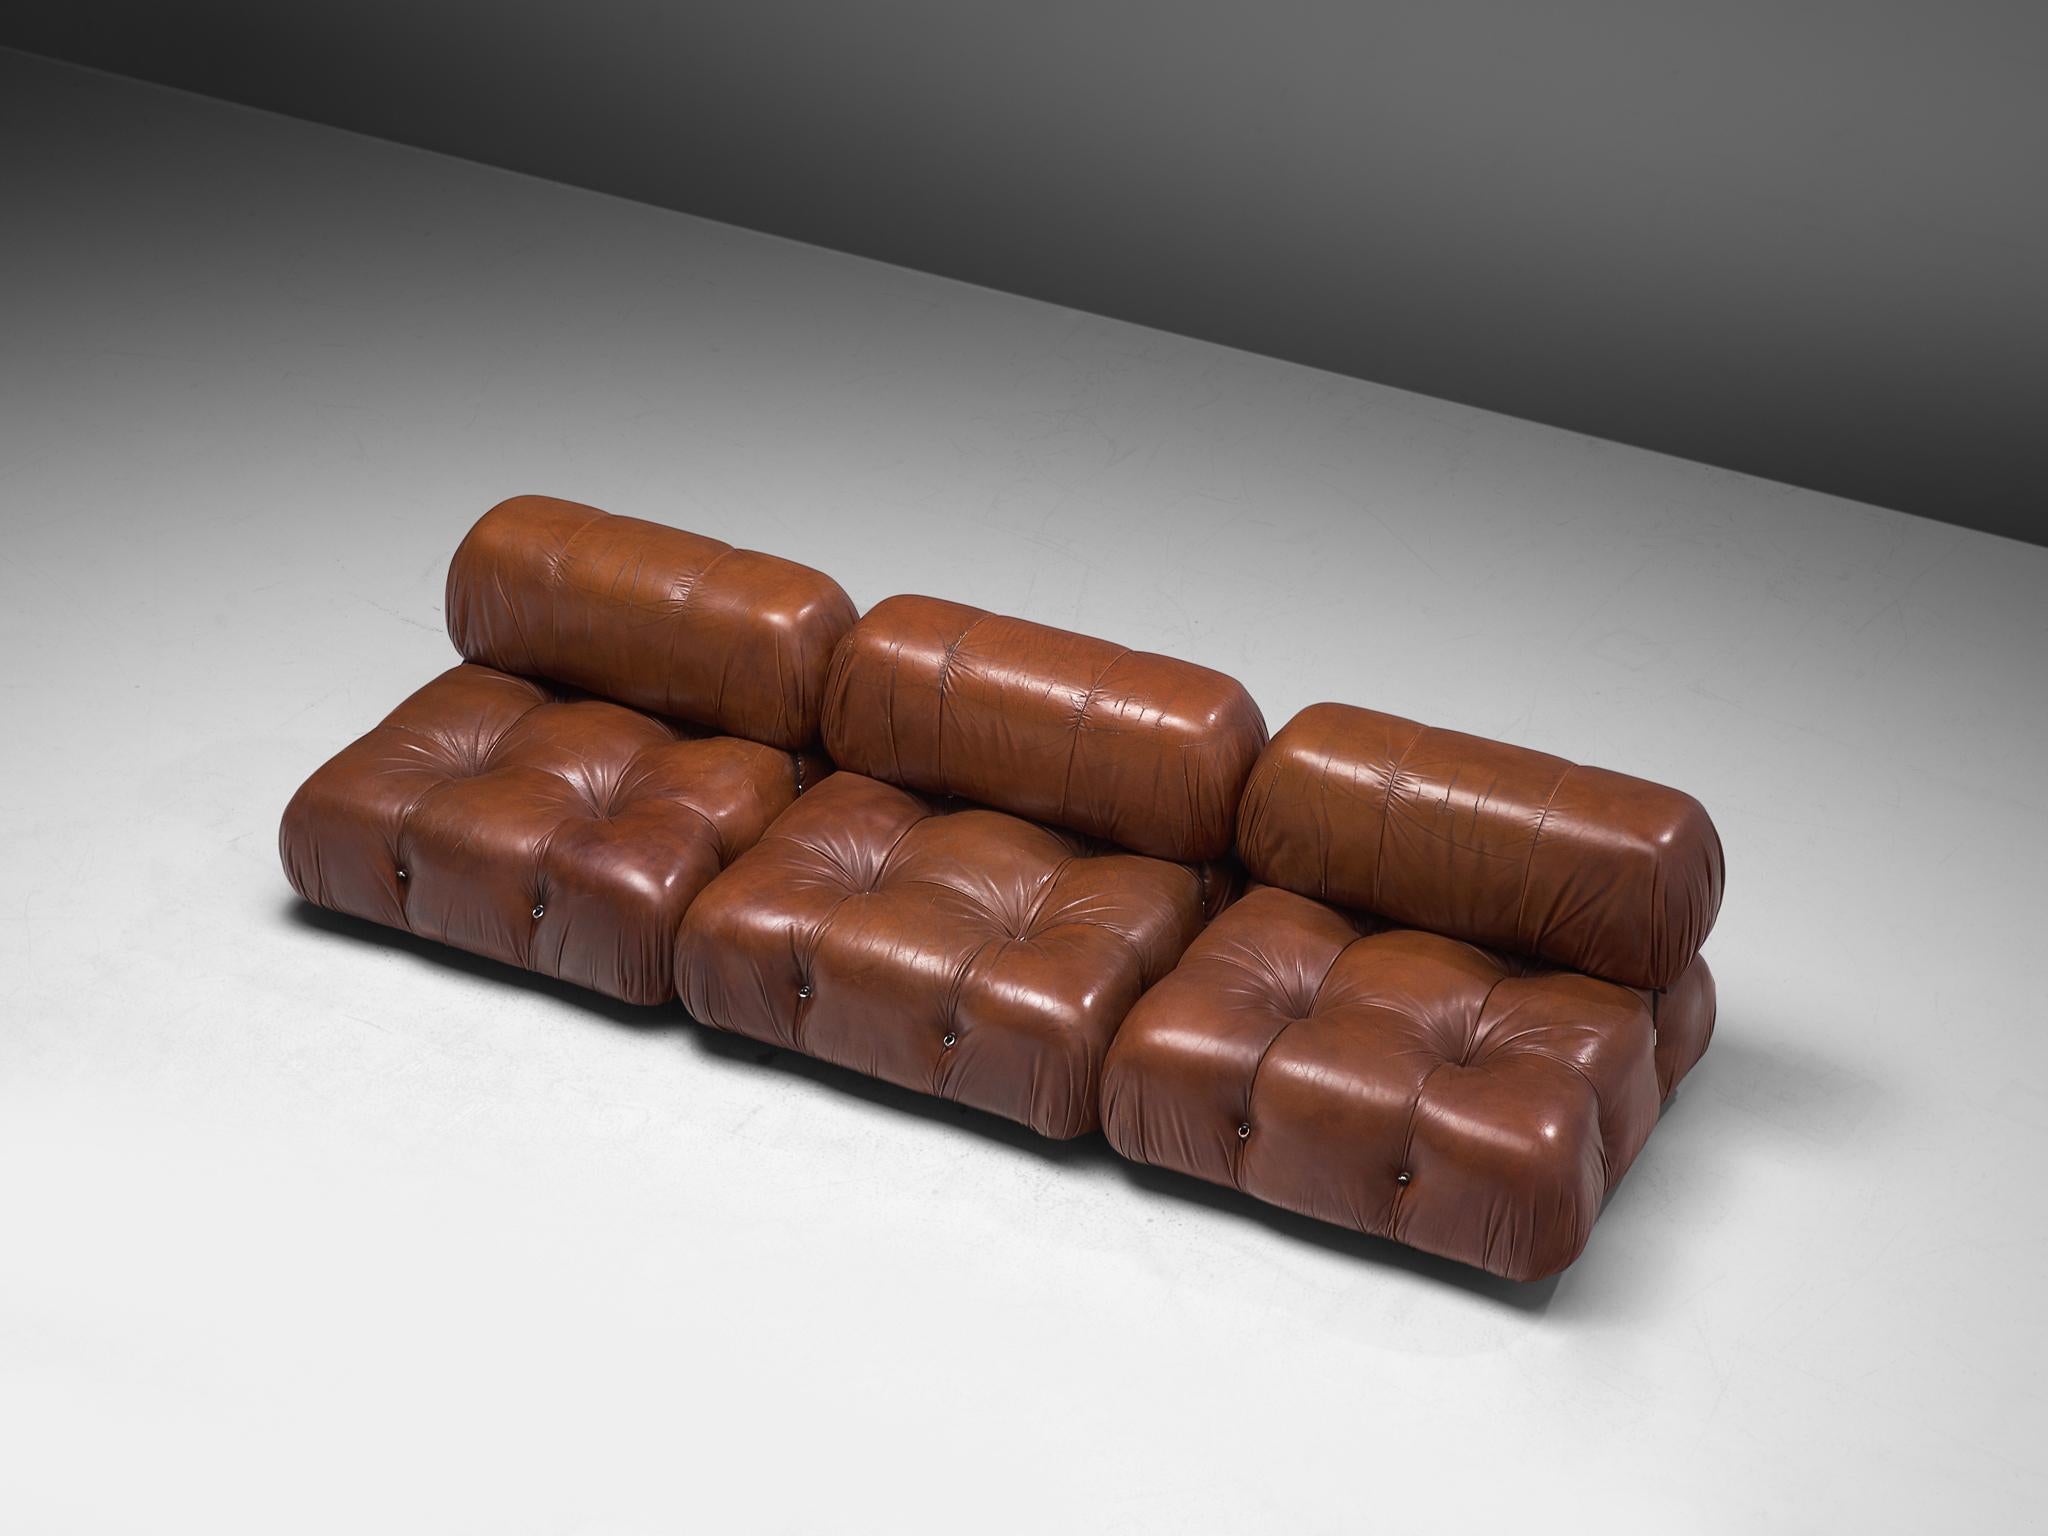 Mario Bellini, modular 'Cameleonda' sofa in original brown leather, Italy, 1972.

The sectional elements of this can be used freely and apart from one another. The backs and armrests are provided with rings and carabiners, which allows the user to